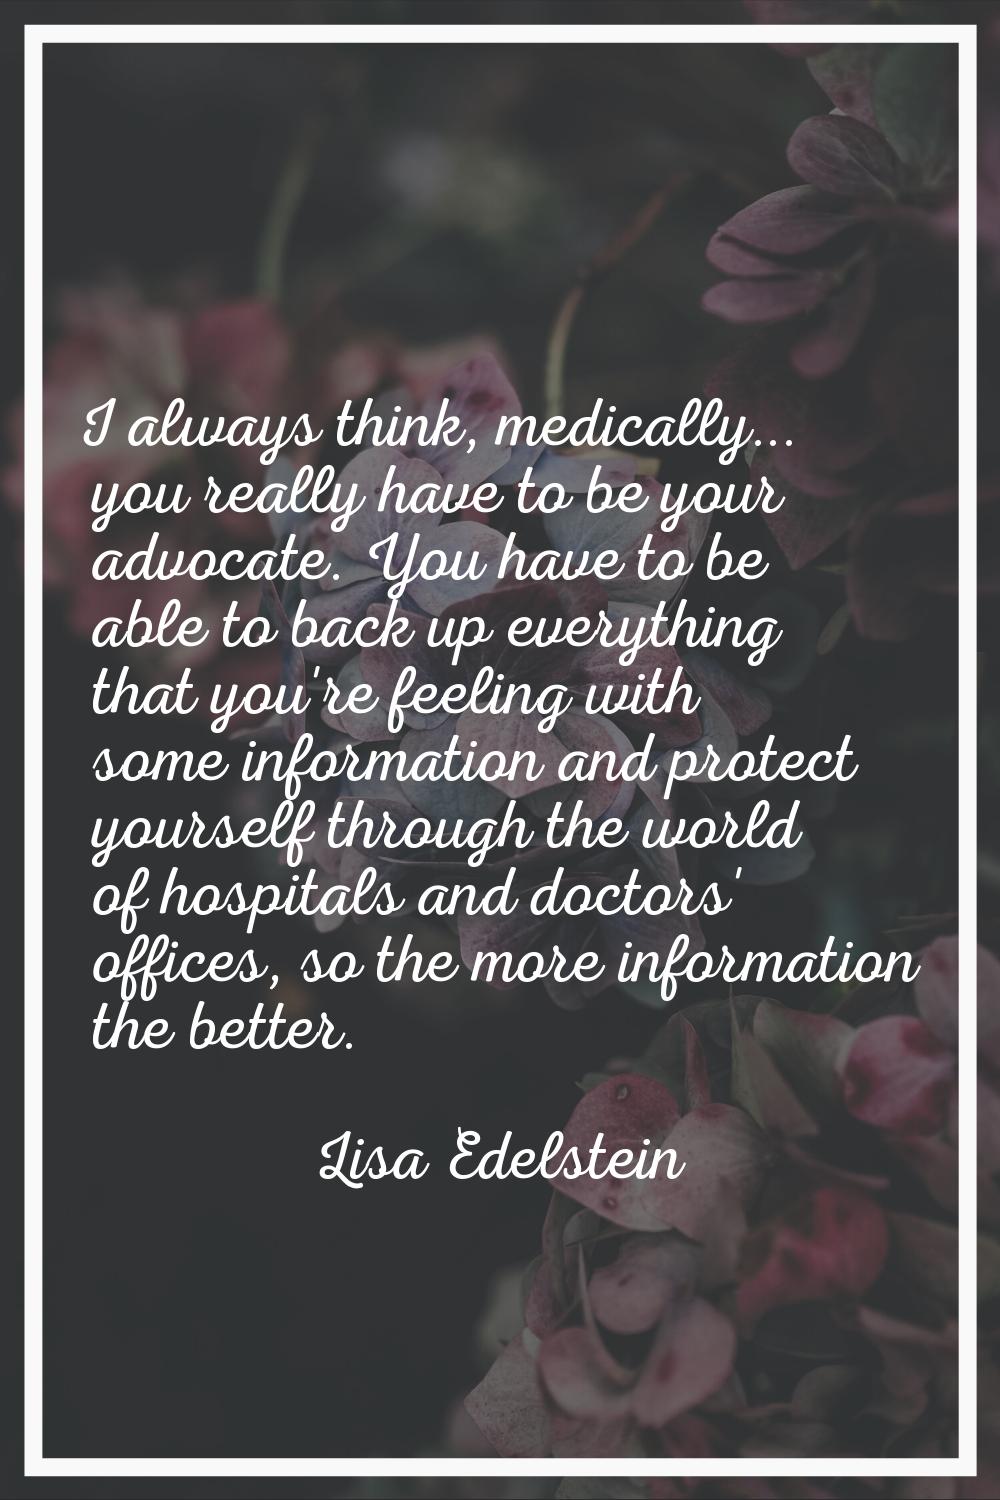 I always think, medically... you really have to be your advocate. You have to be able to back up ev